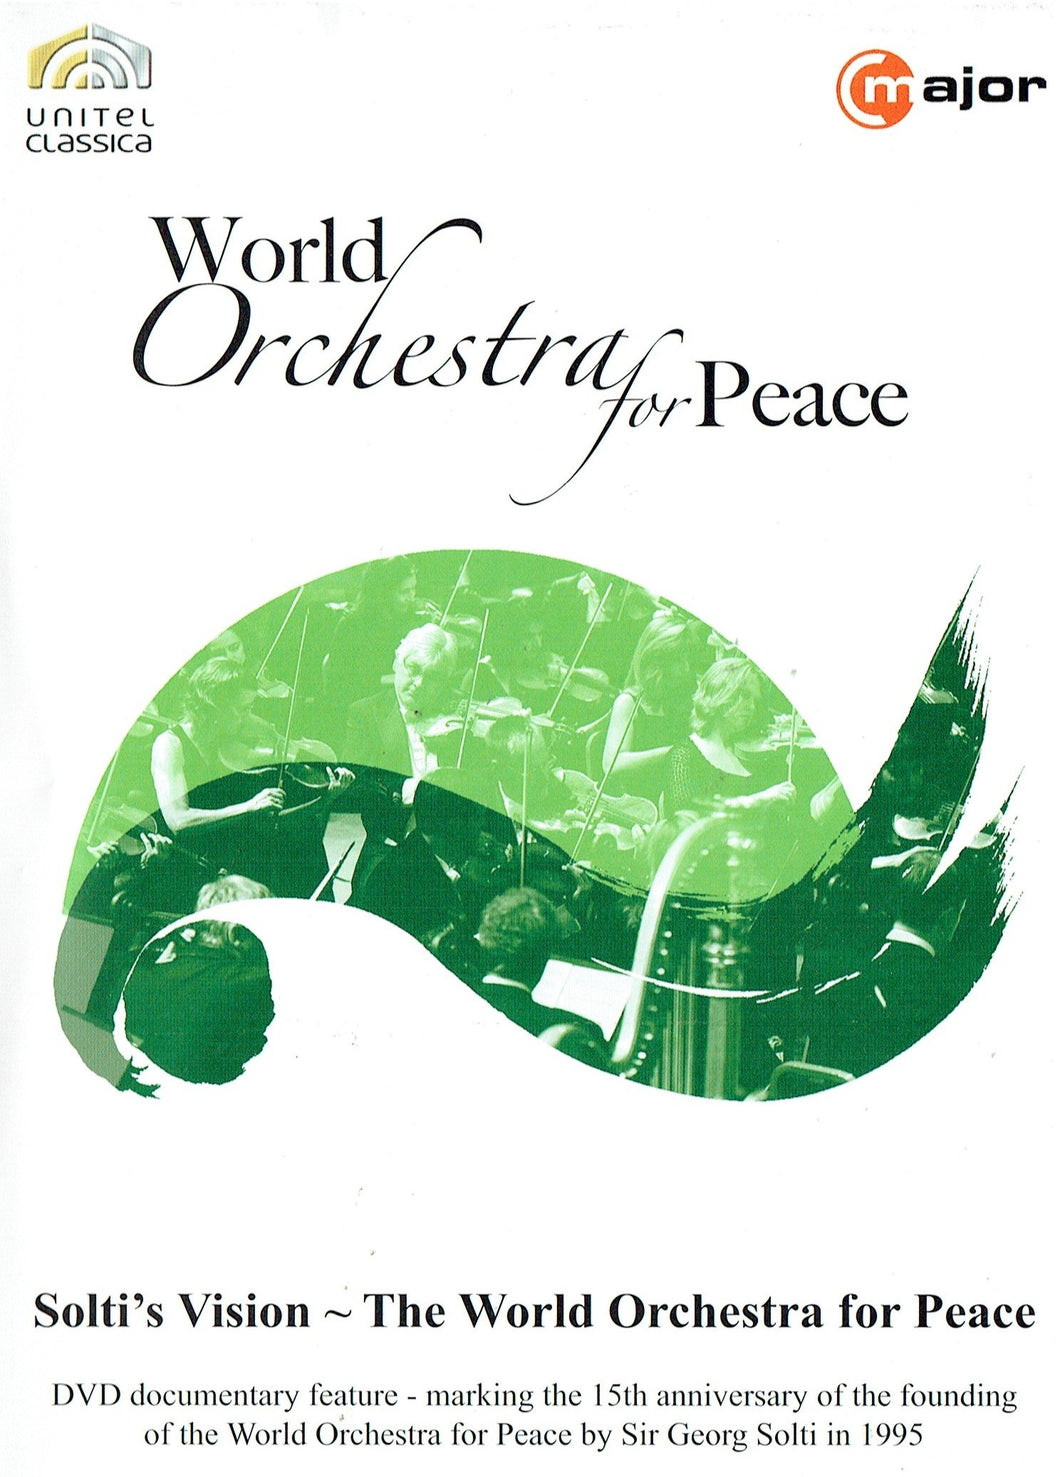 World Orchestra for Peace - 15th Anniversary Documentary 2010: Solti's Vision